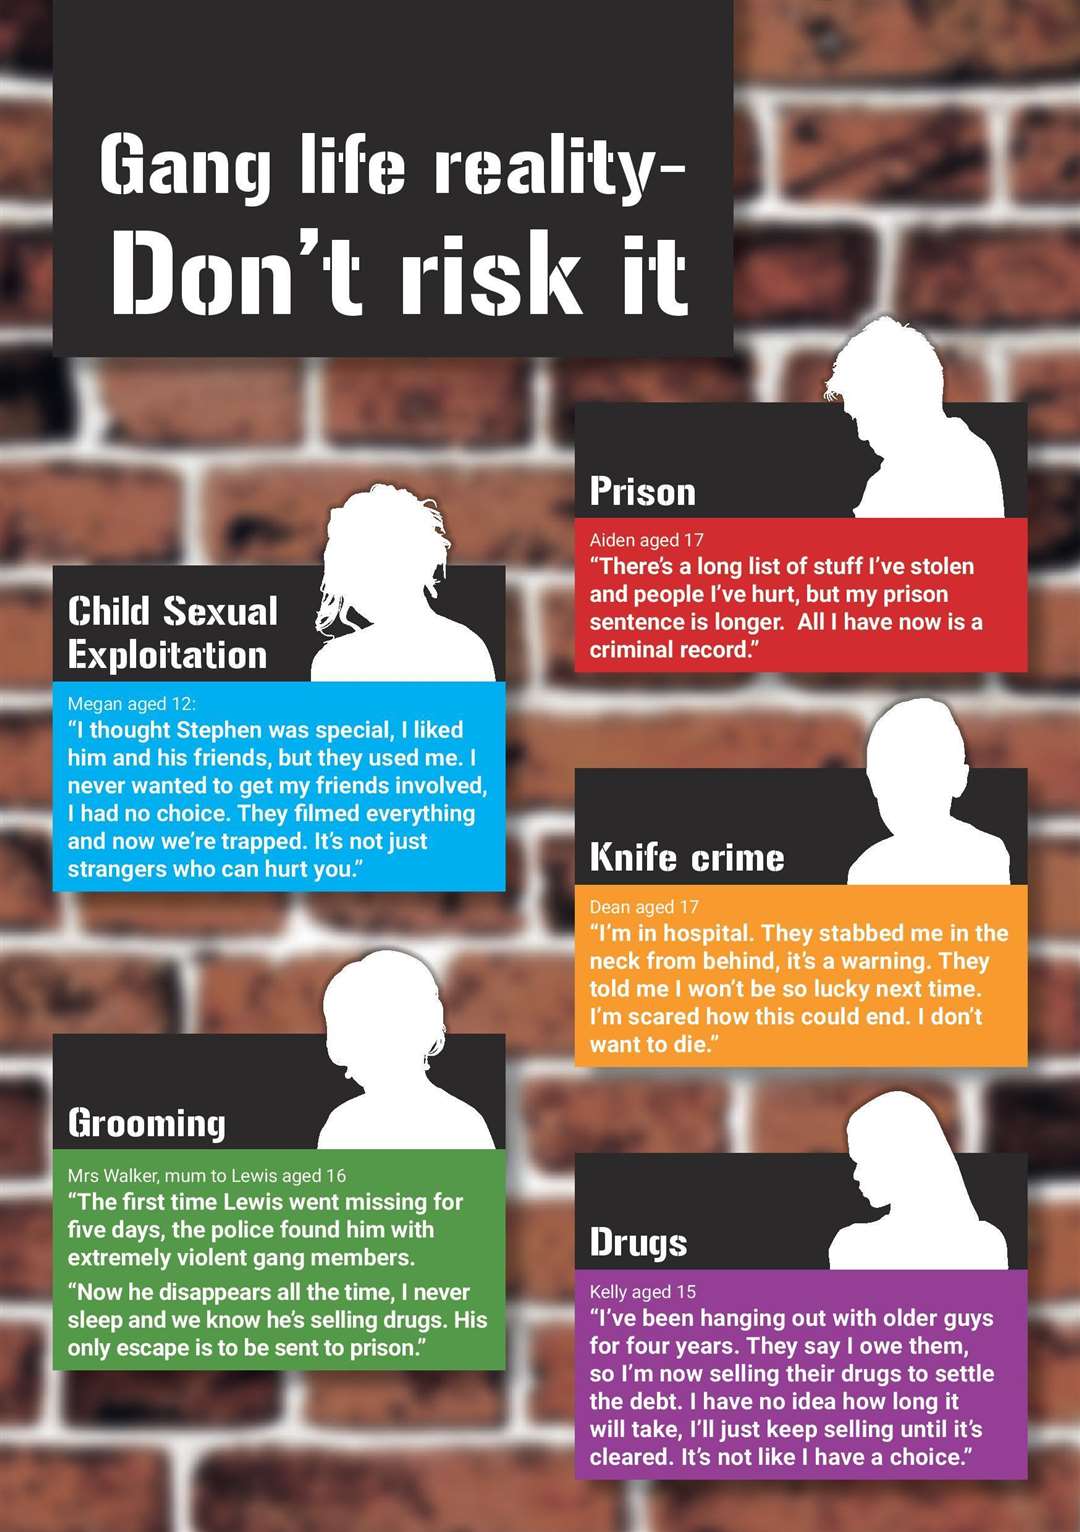 Gang advice leaflet created by Kent Police